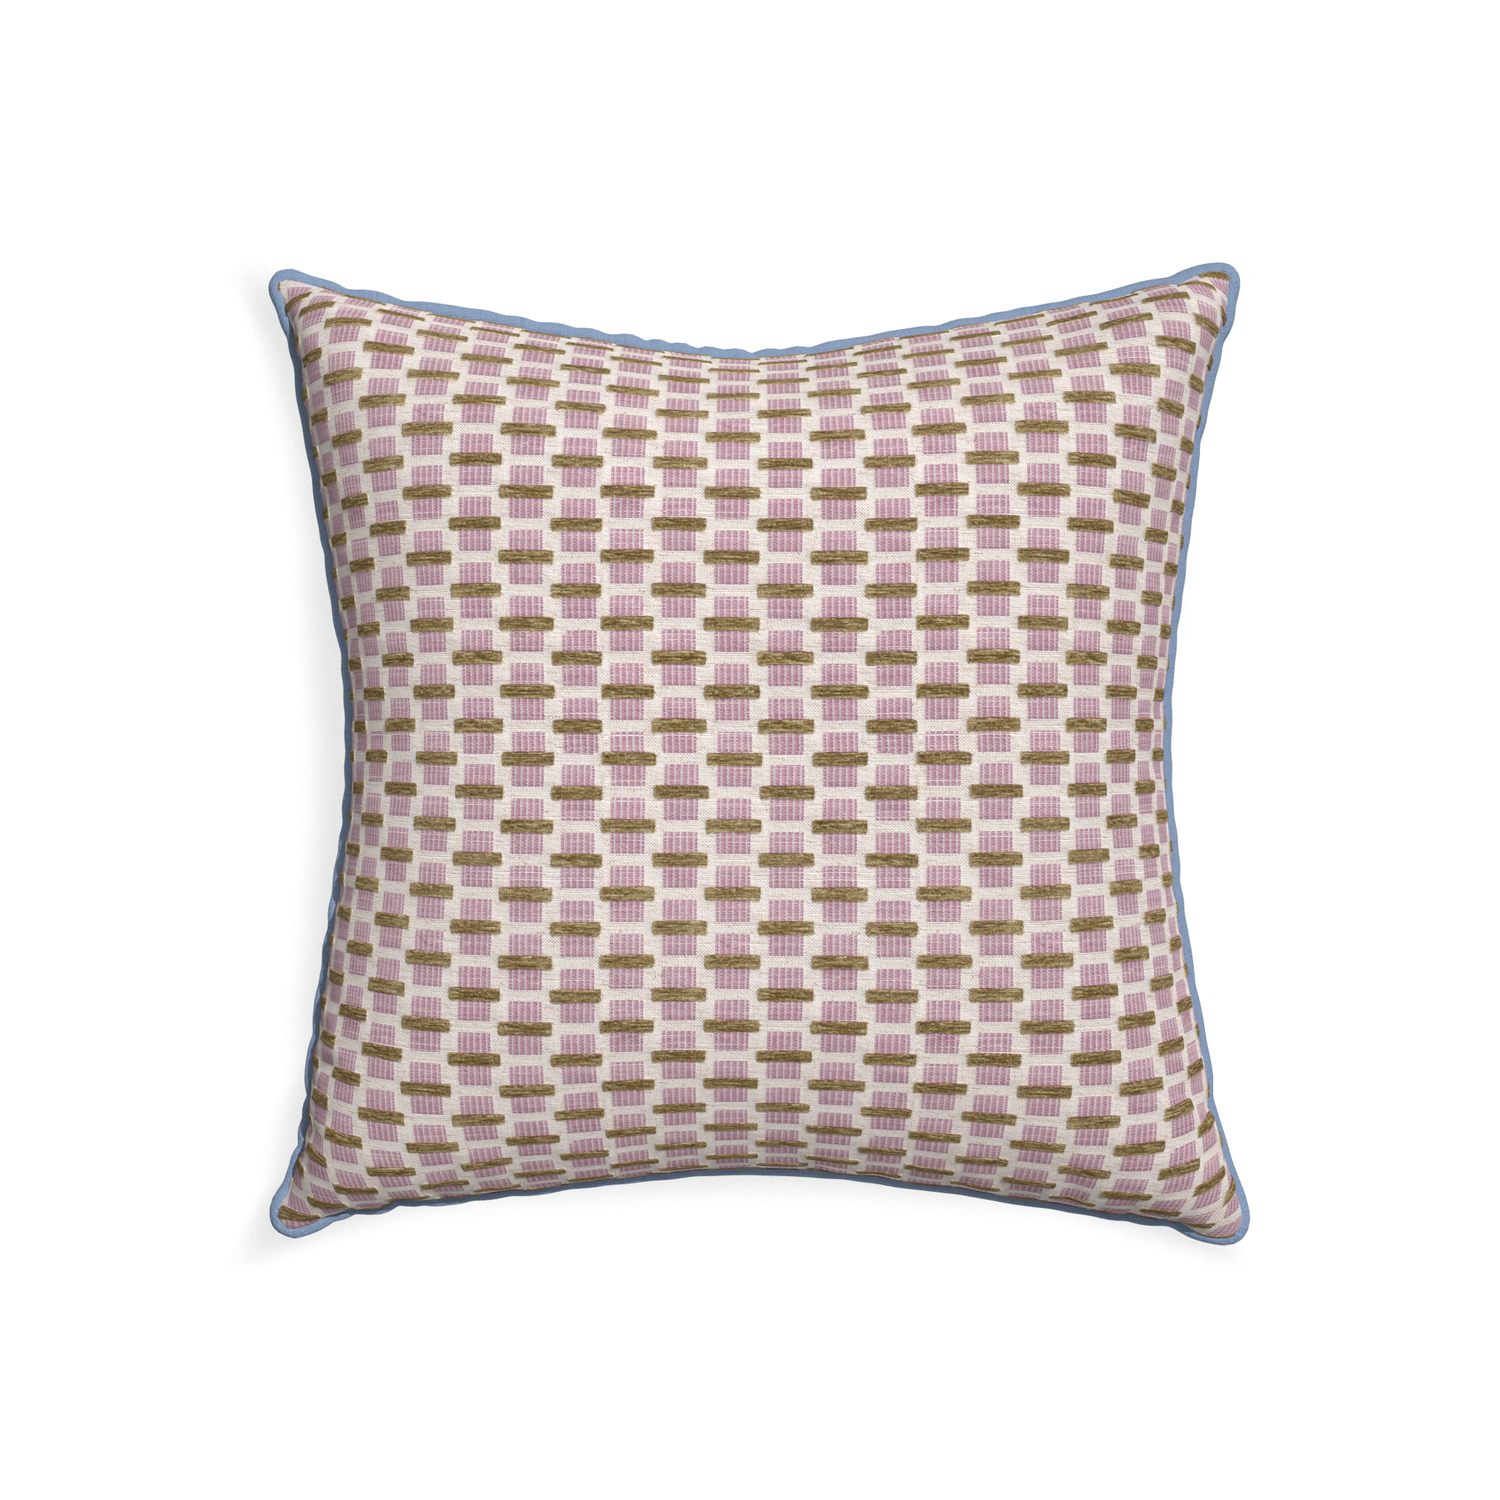 22-square willow orchid custom pink geometric chenillepillow with sky piping on white background